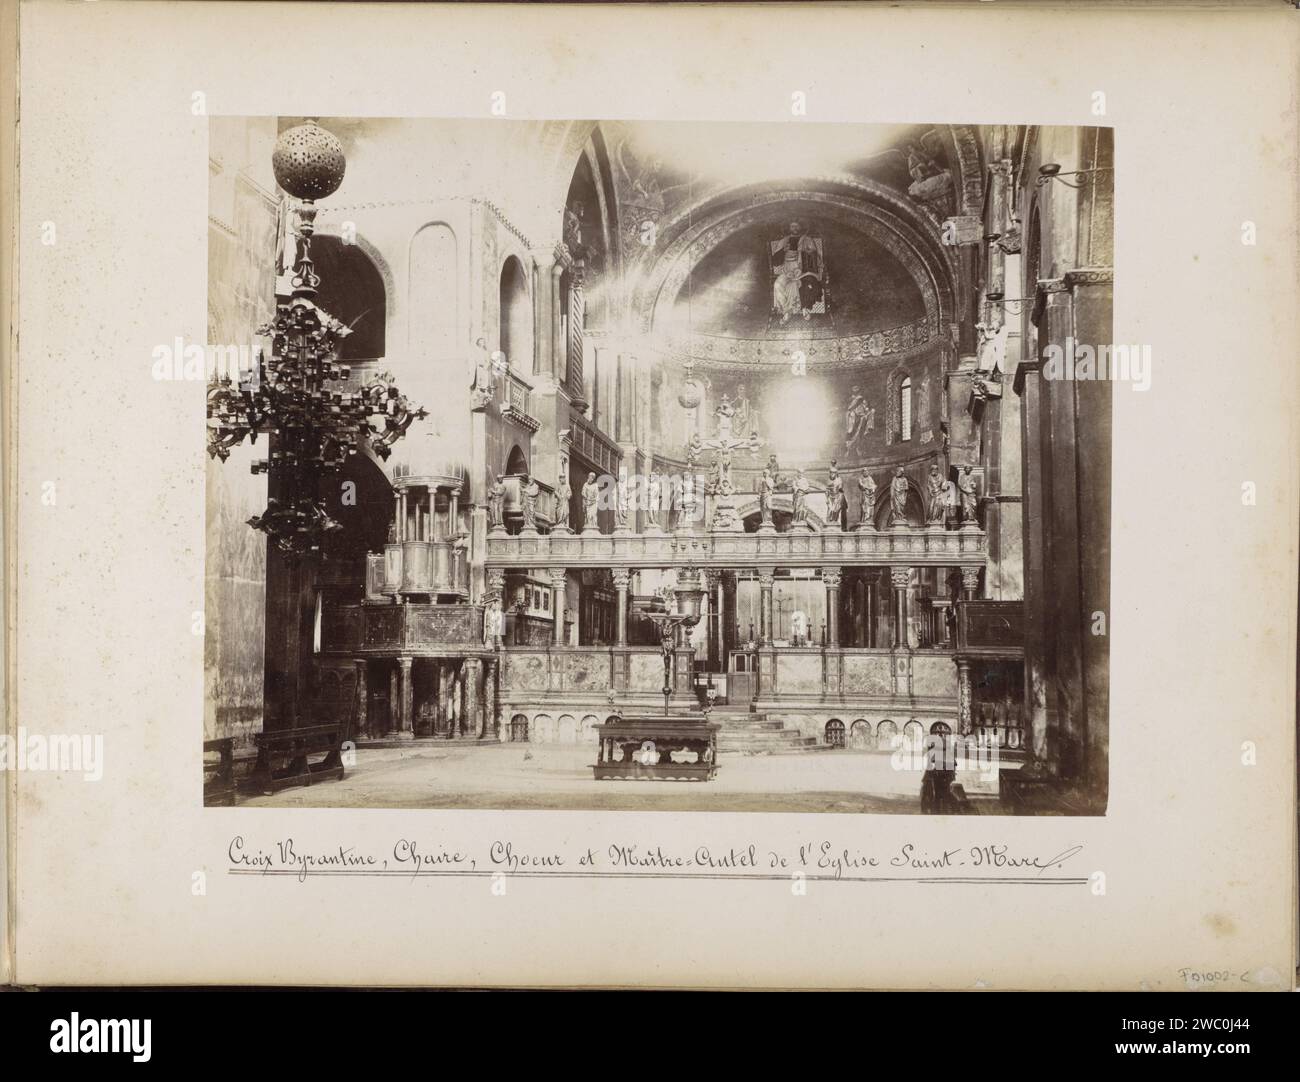 Choir, Byzantine Cross, main altar and retable of the Basilica of San Marco in Venice, Carlo Ponti, 1860 - 1881 photograph Part of Topographic Album of Venice 1881. Venice photographic support albumen print parts of church interior Basilica of San Marco Stock Photo